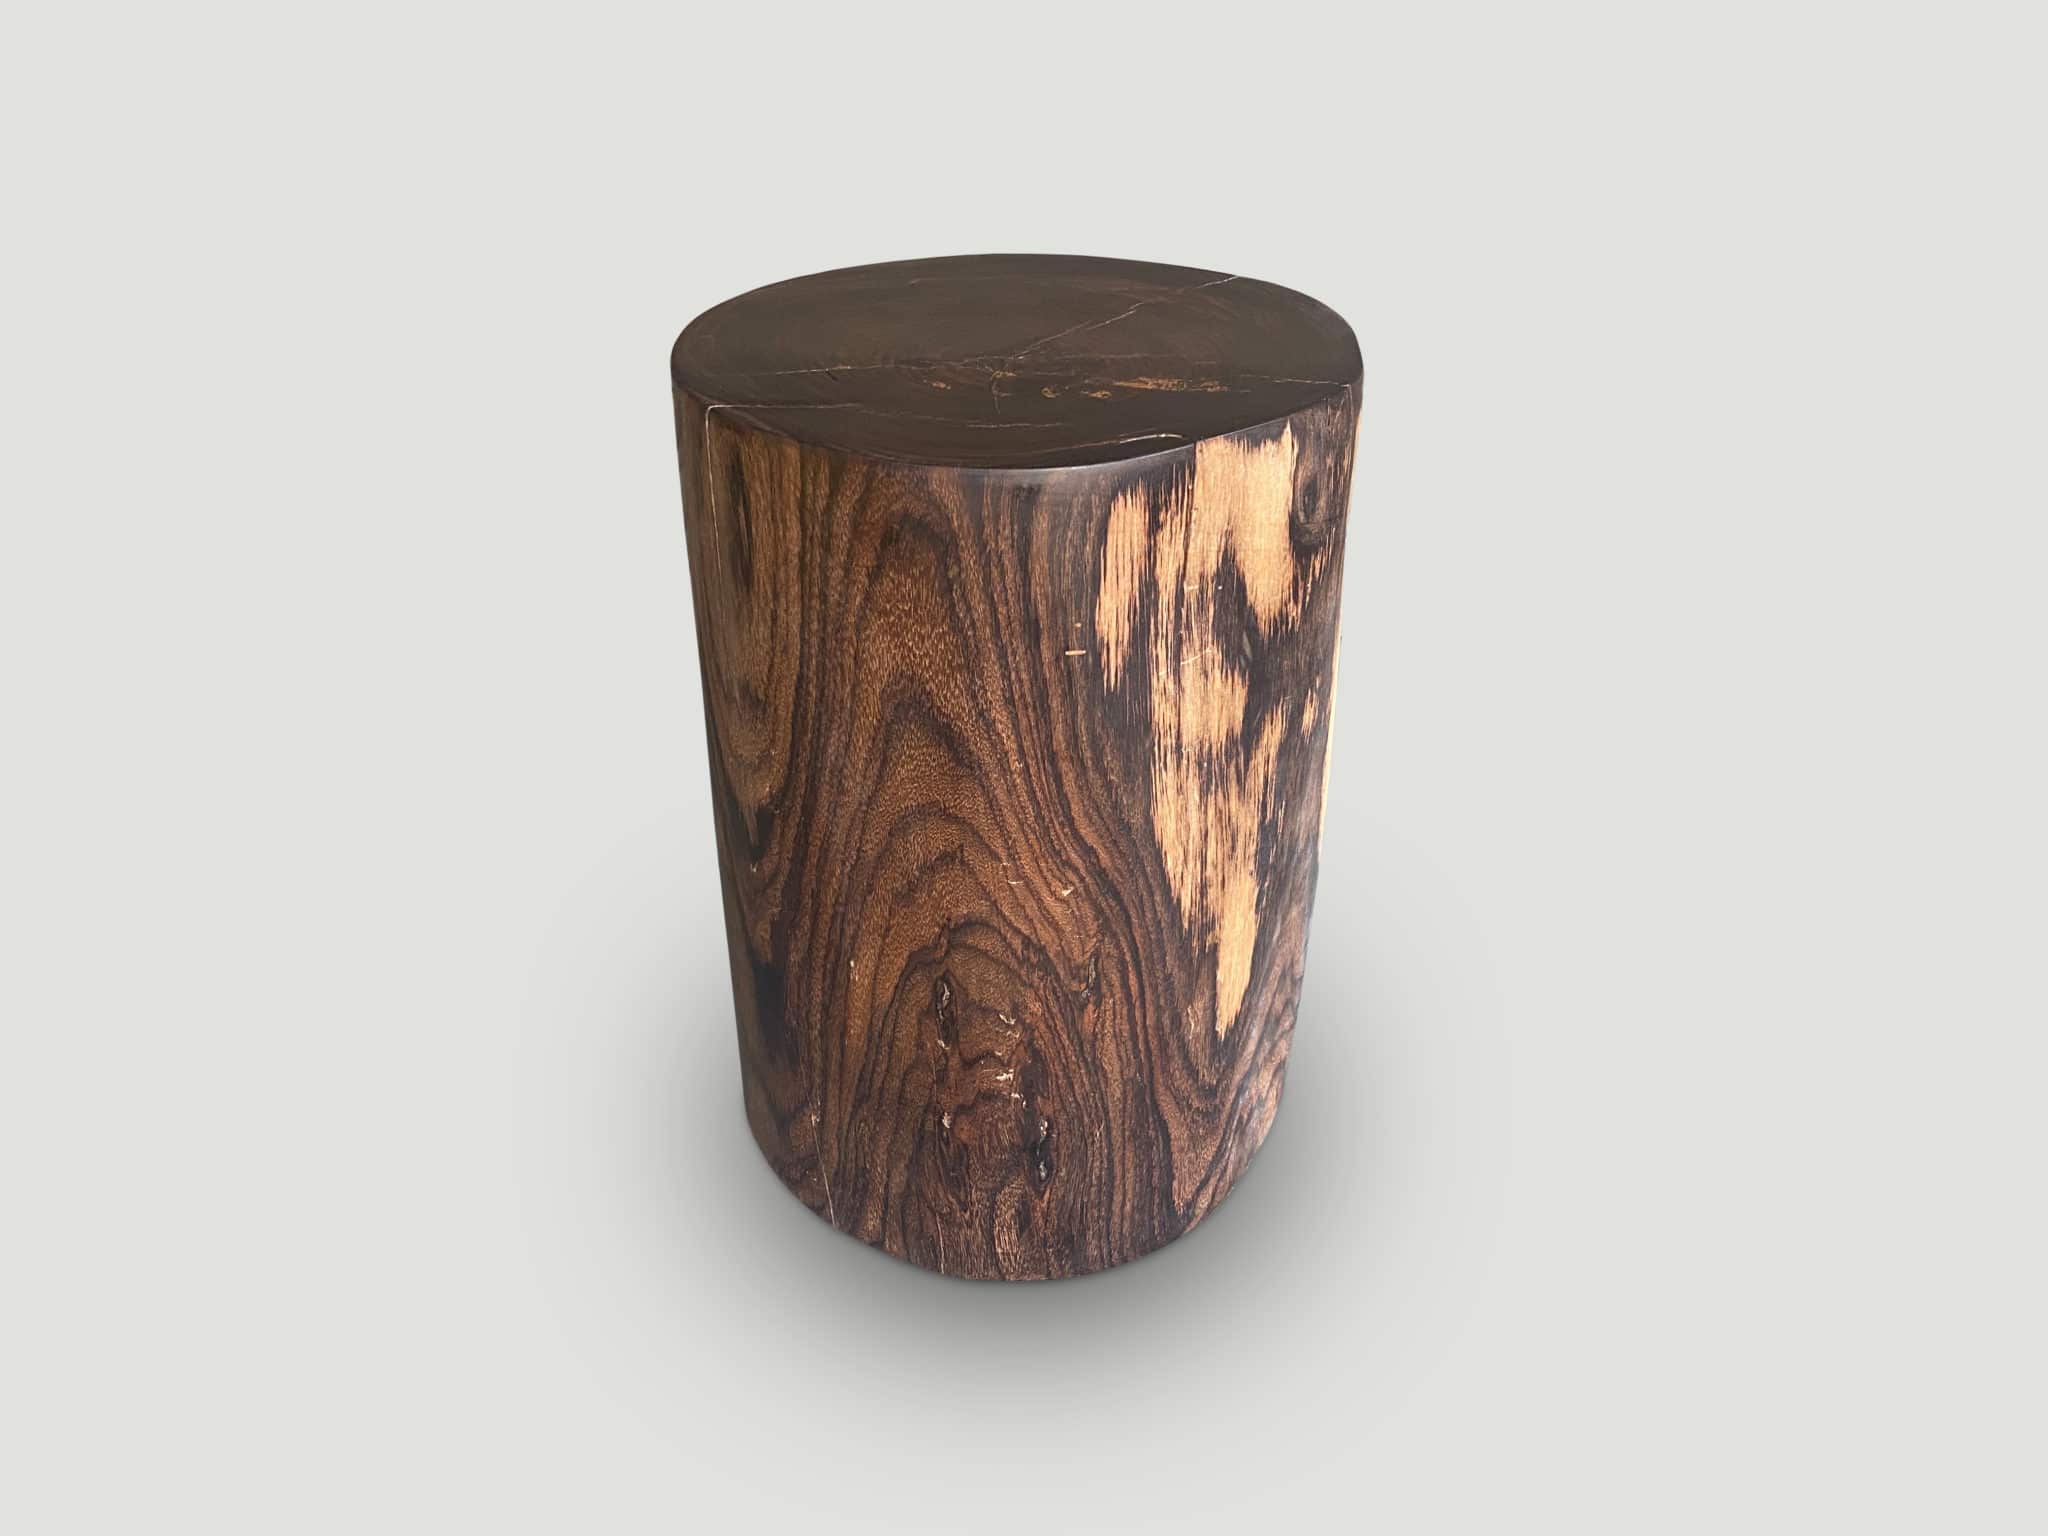 EXQUISITE ROSE WOOD SIDE TABLE